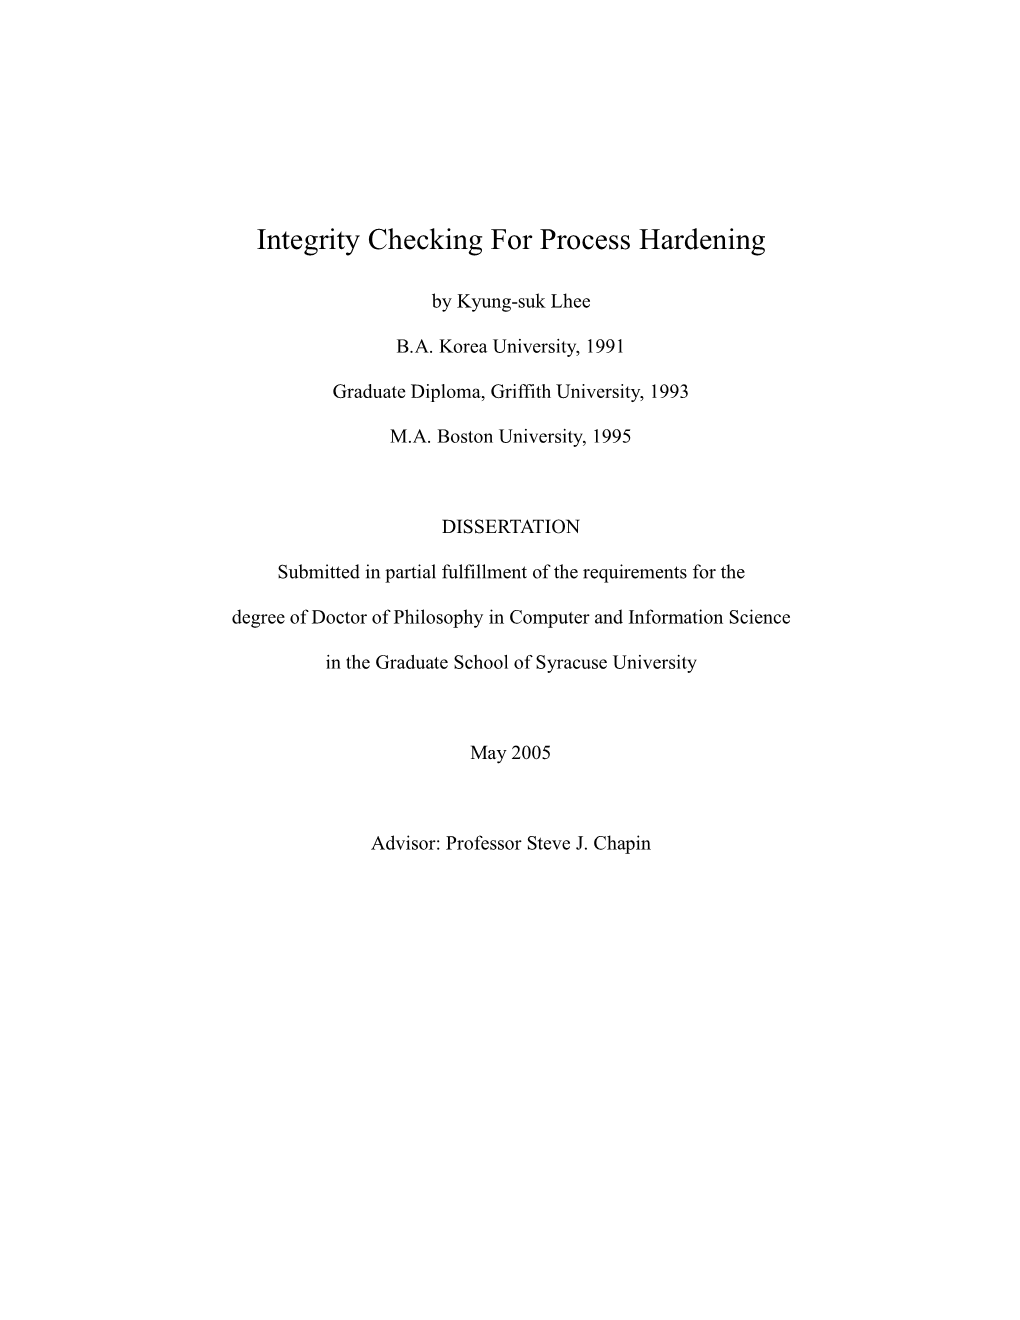 Integrity Checking for Process Hardening